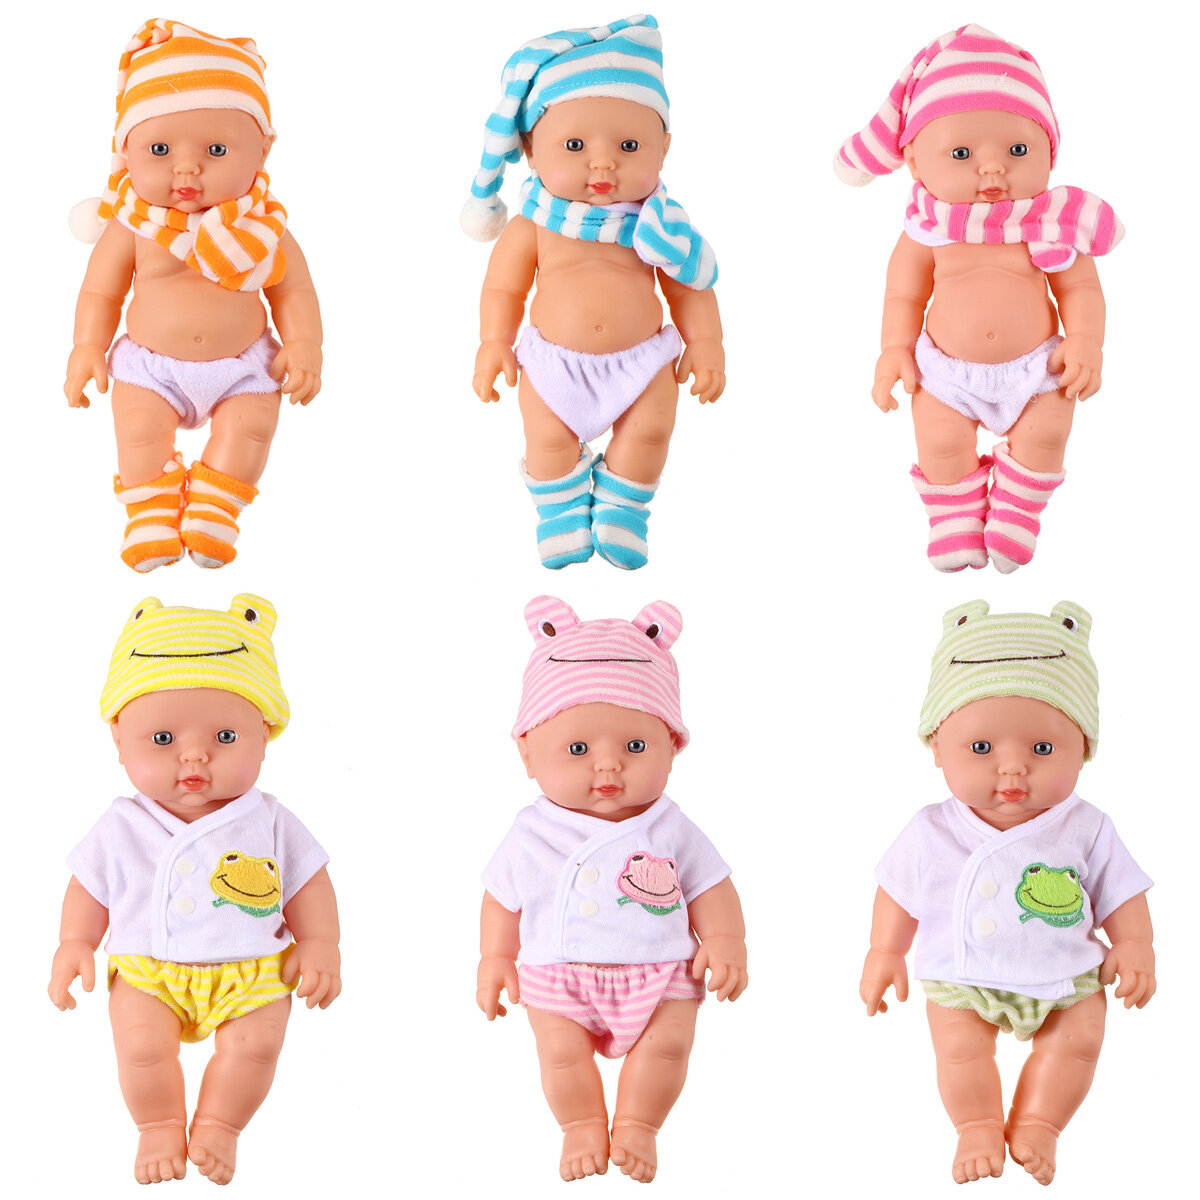 30CM Height Simulation Soft Silicone Vinyl Joint Removable Washable Reborn Baby Doll Toy for Kids Birthday Christmas Col